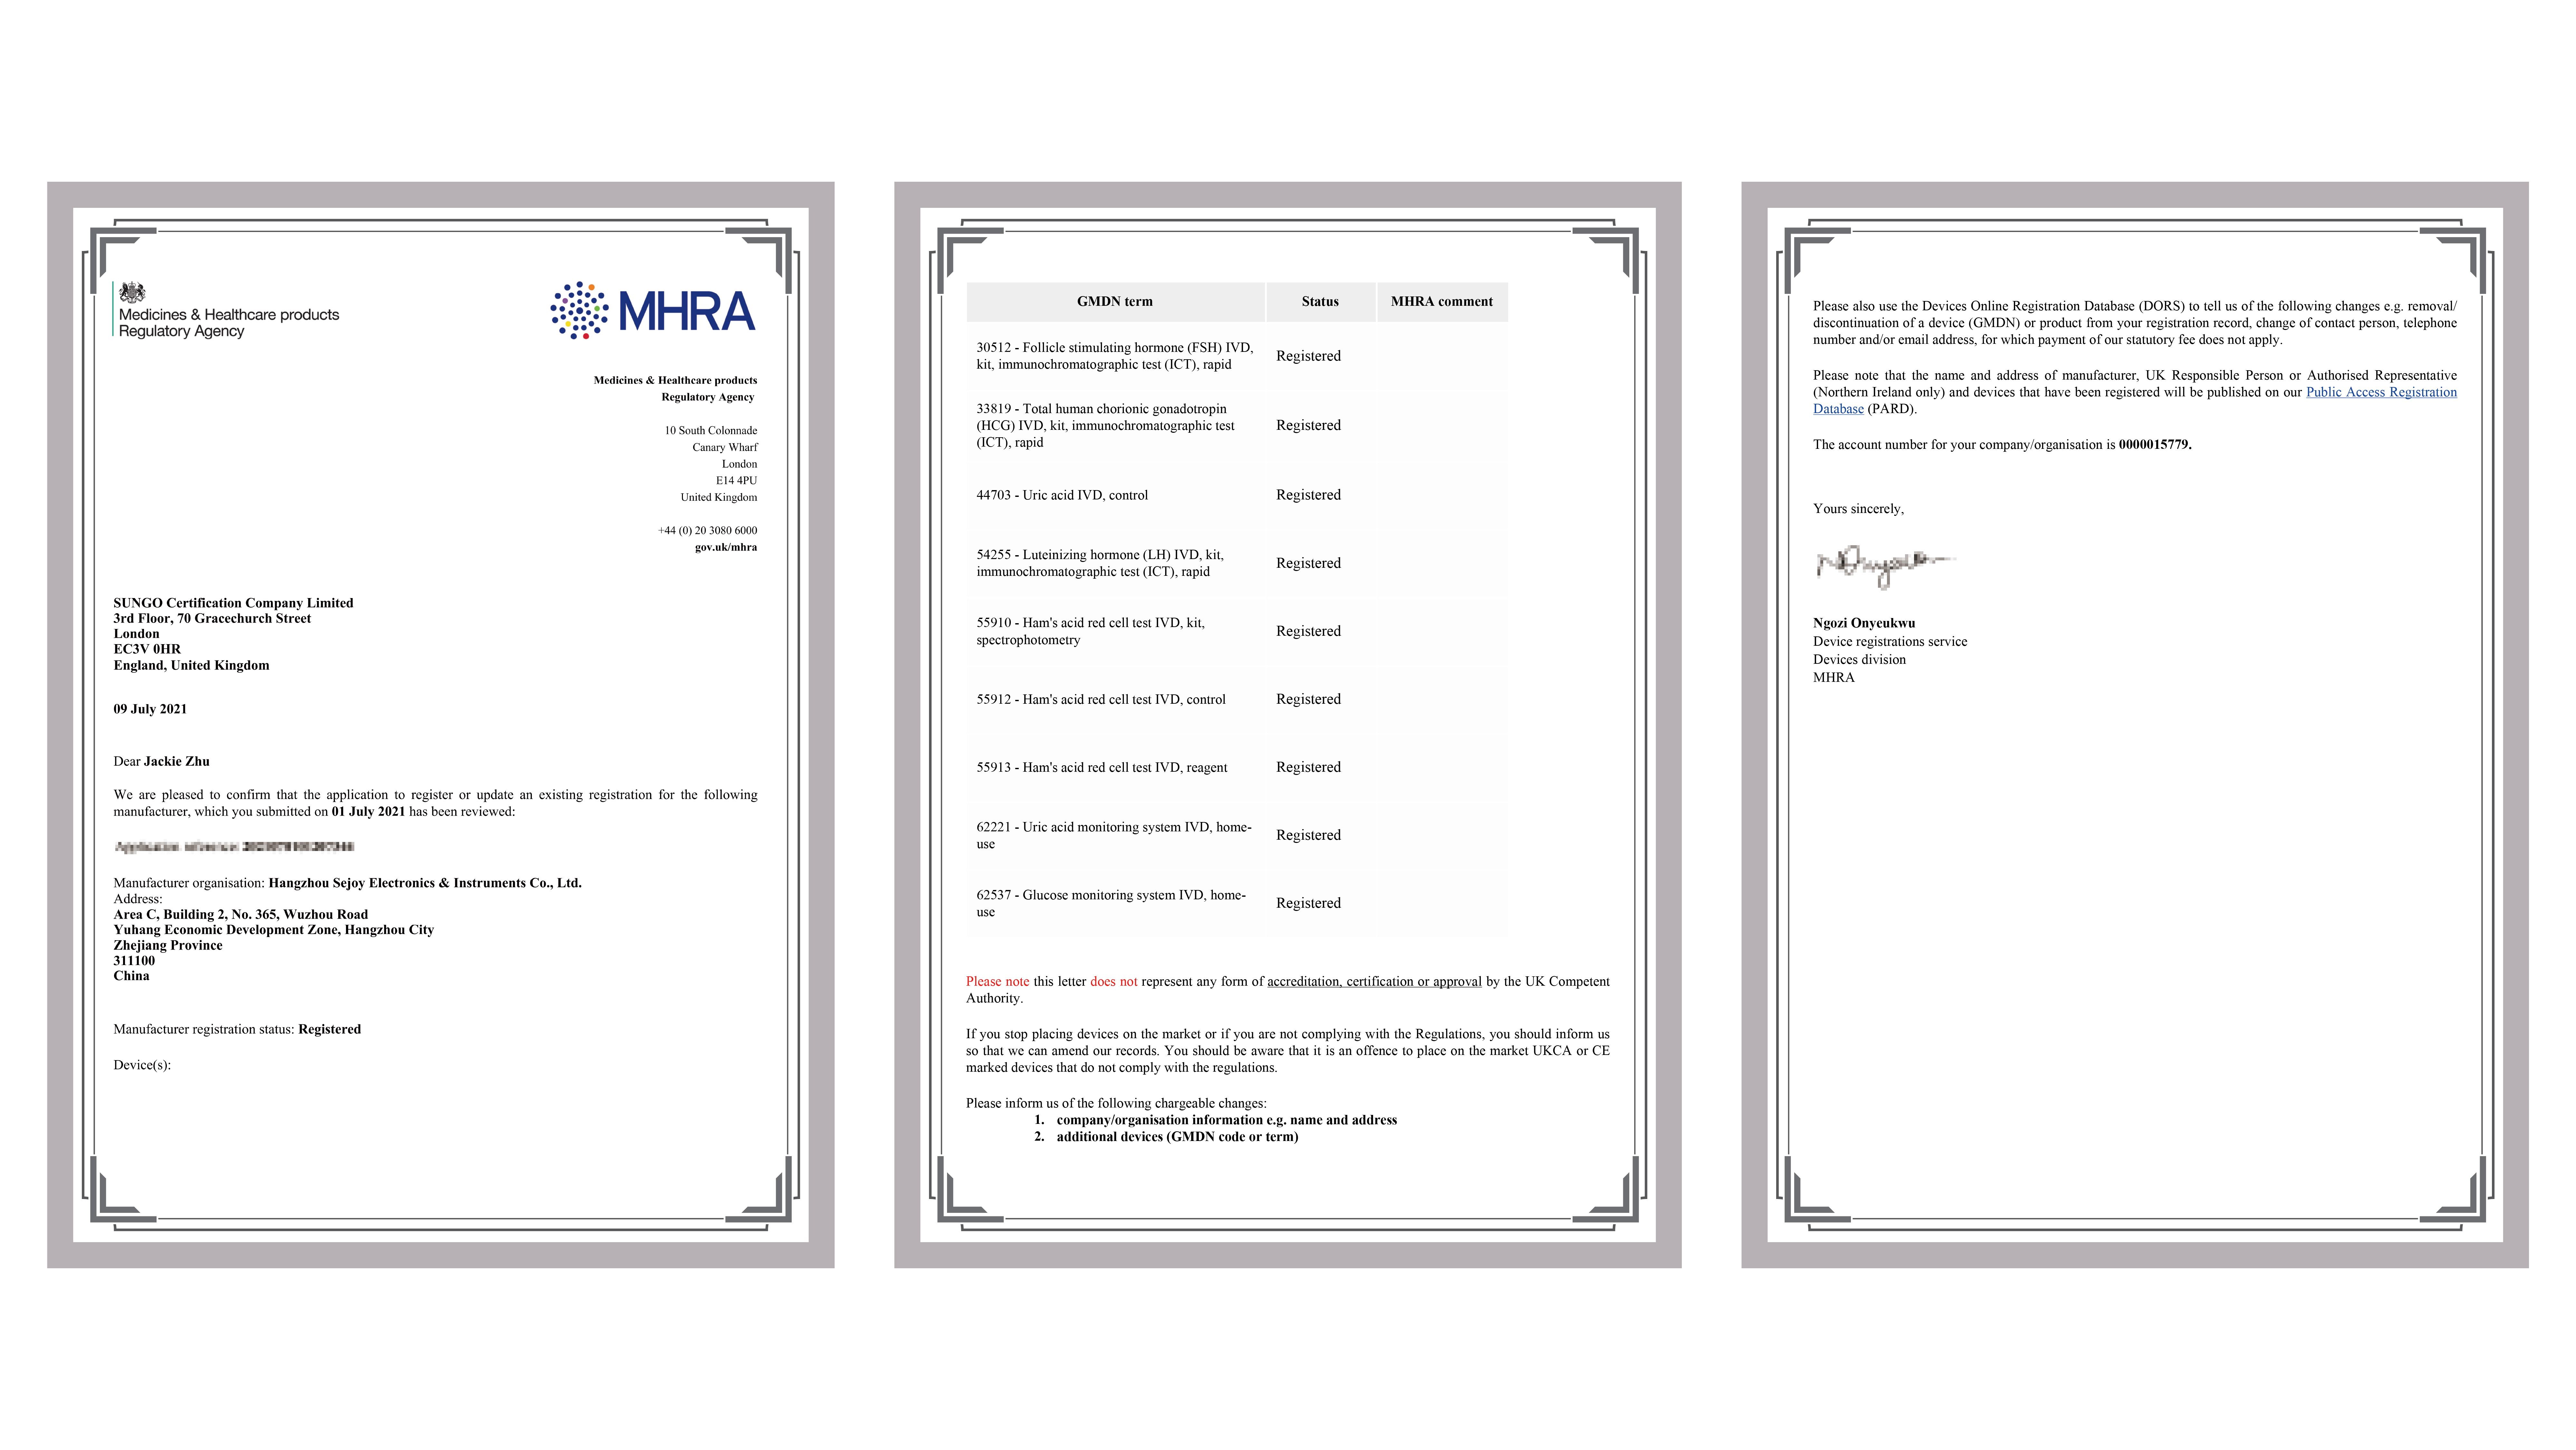 Congratulations to have received the MHRA Certificate for COVID-19